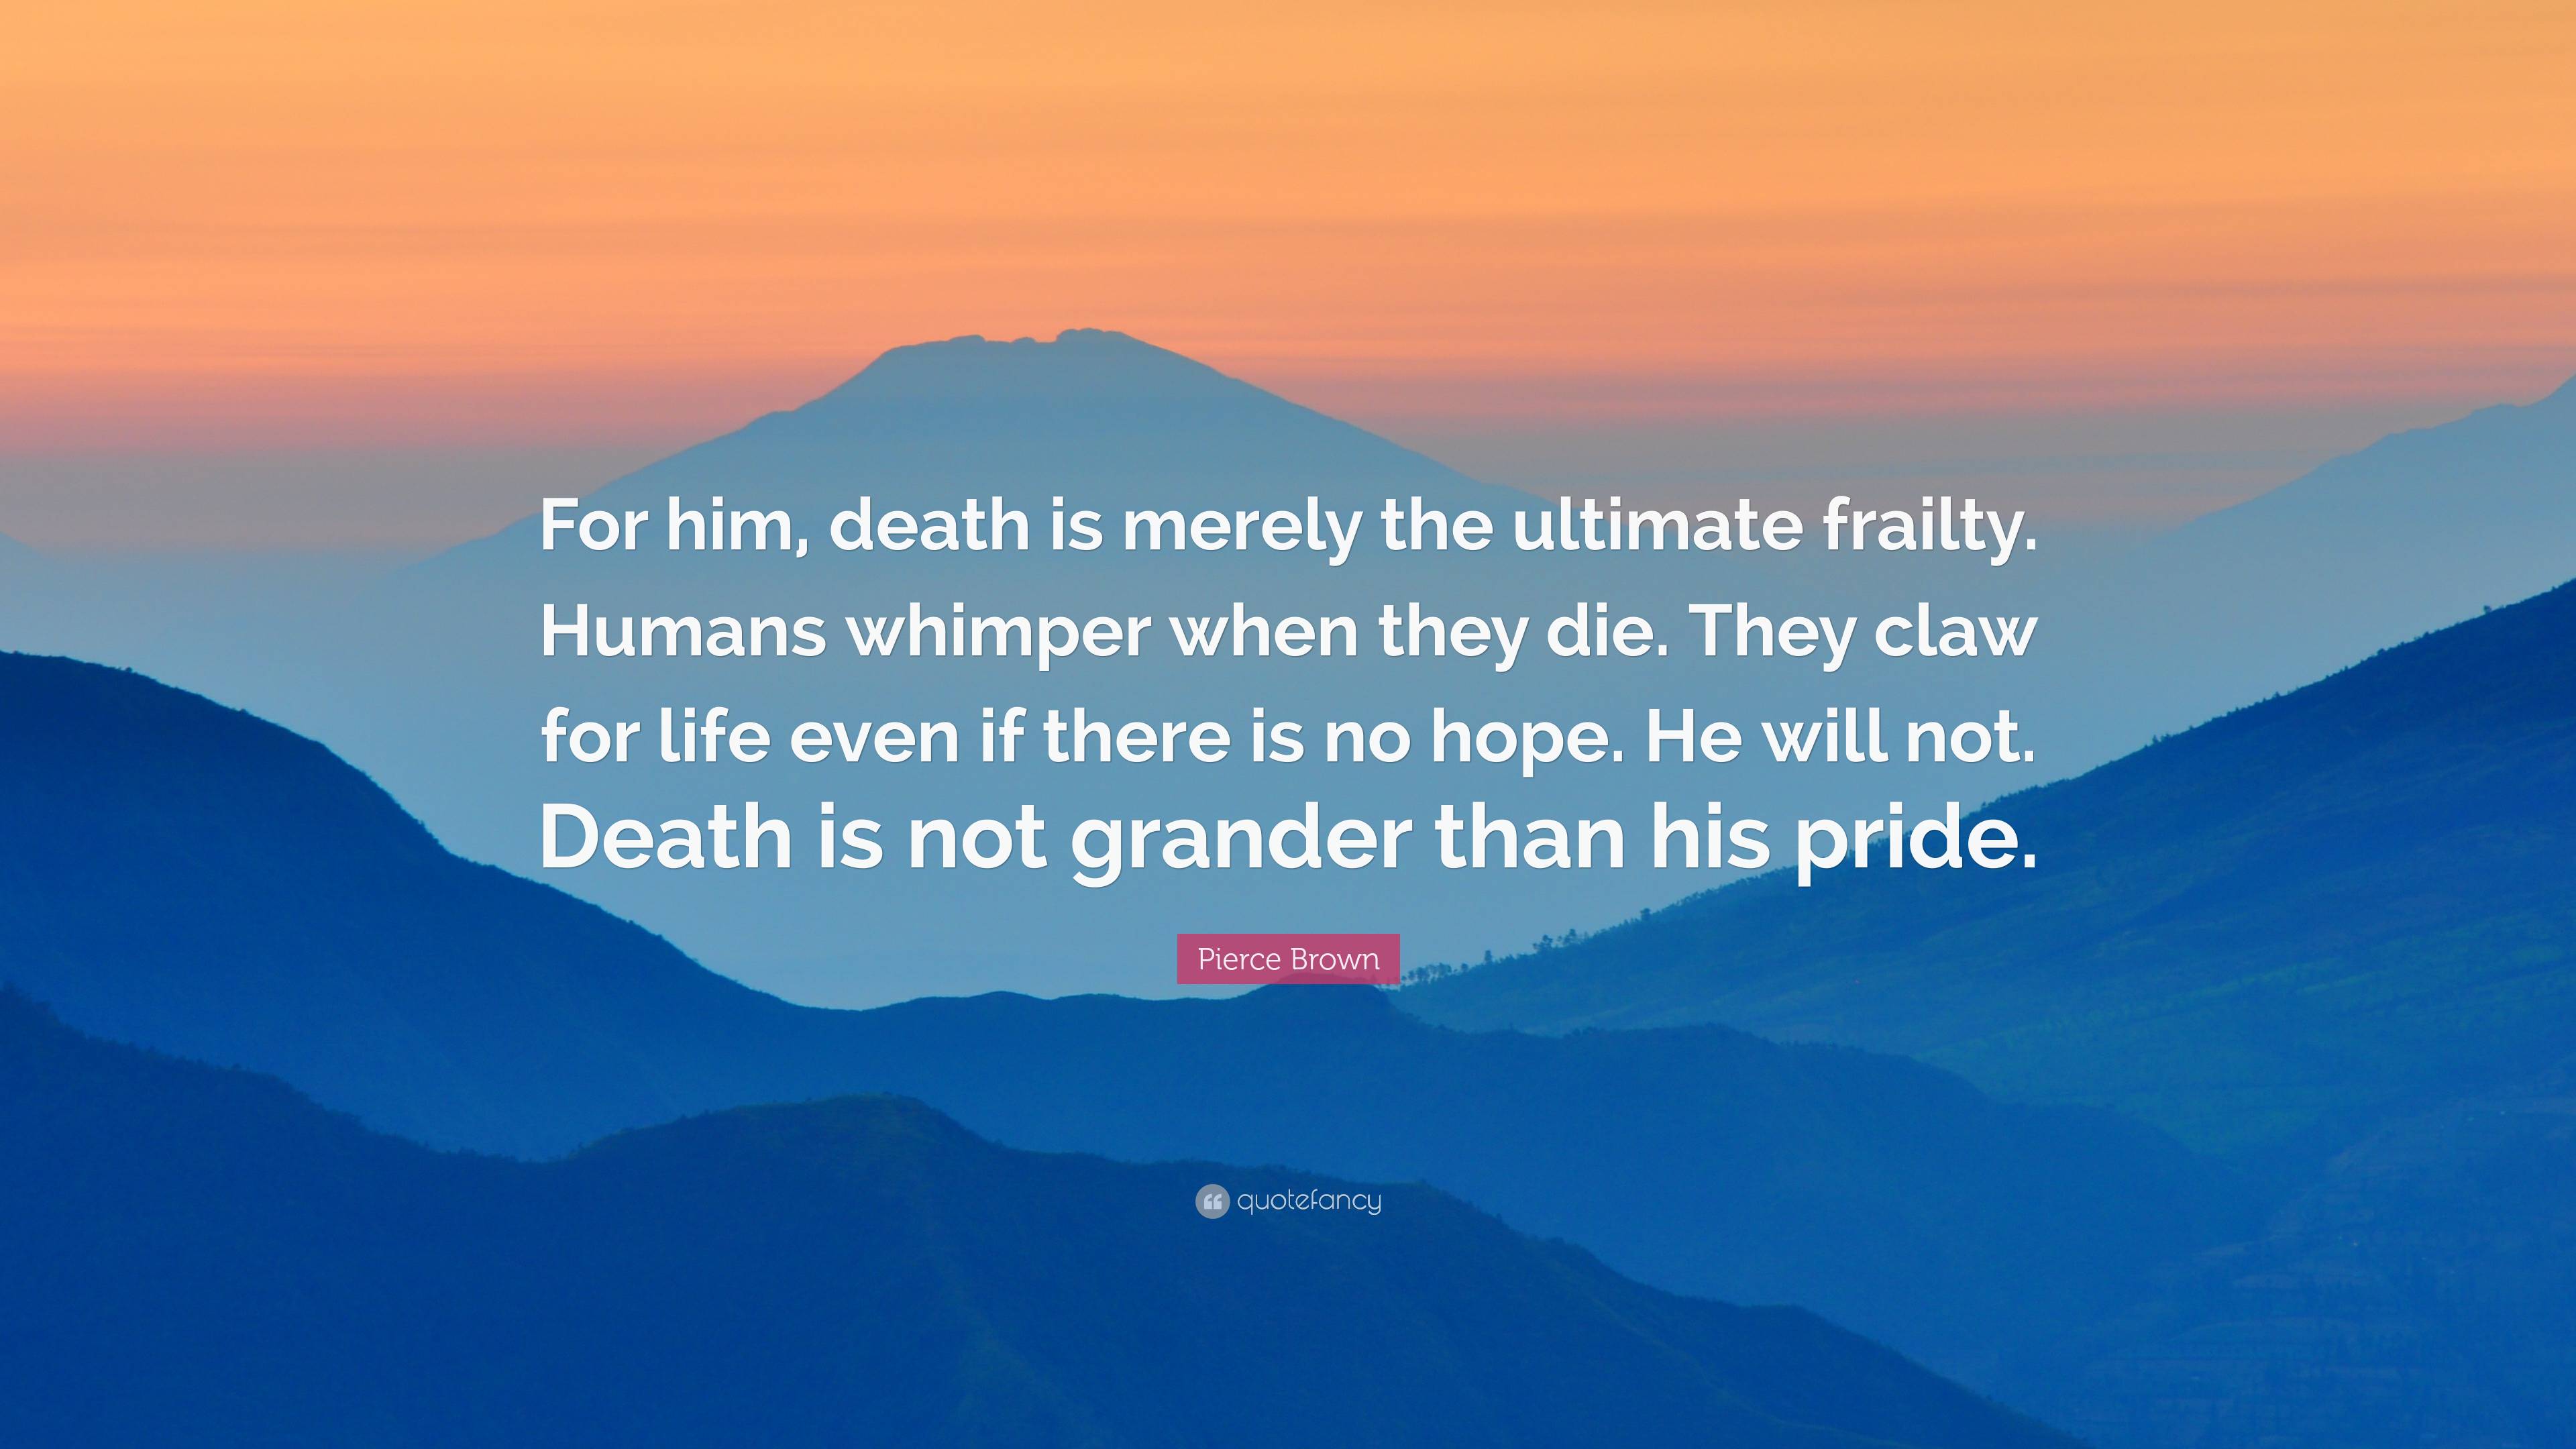 Pierce Brown Quote: “For him, death is merely the ultimate frailty ...